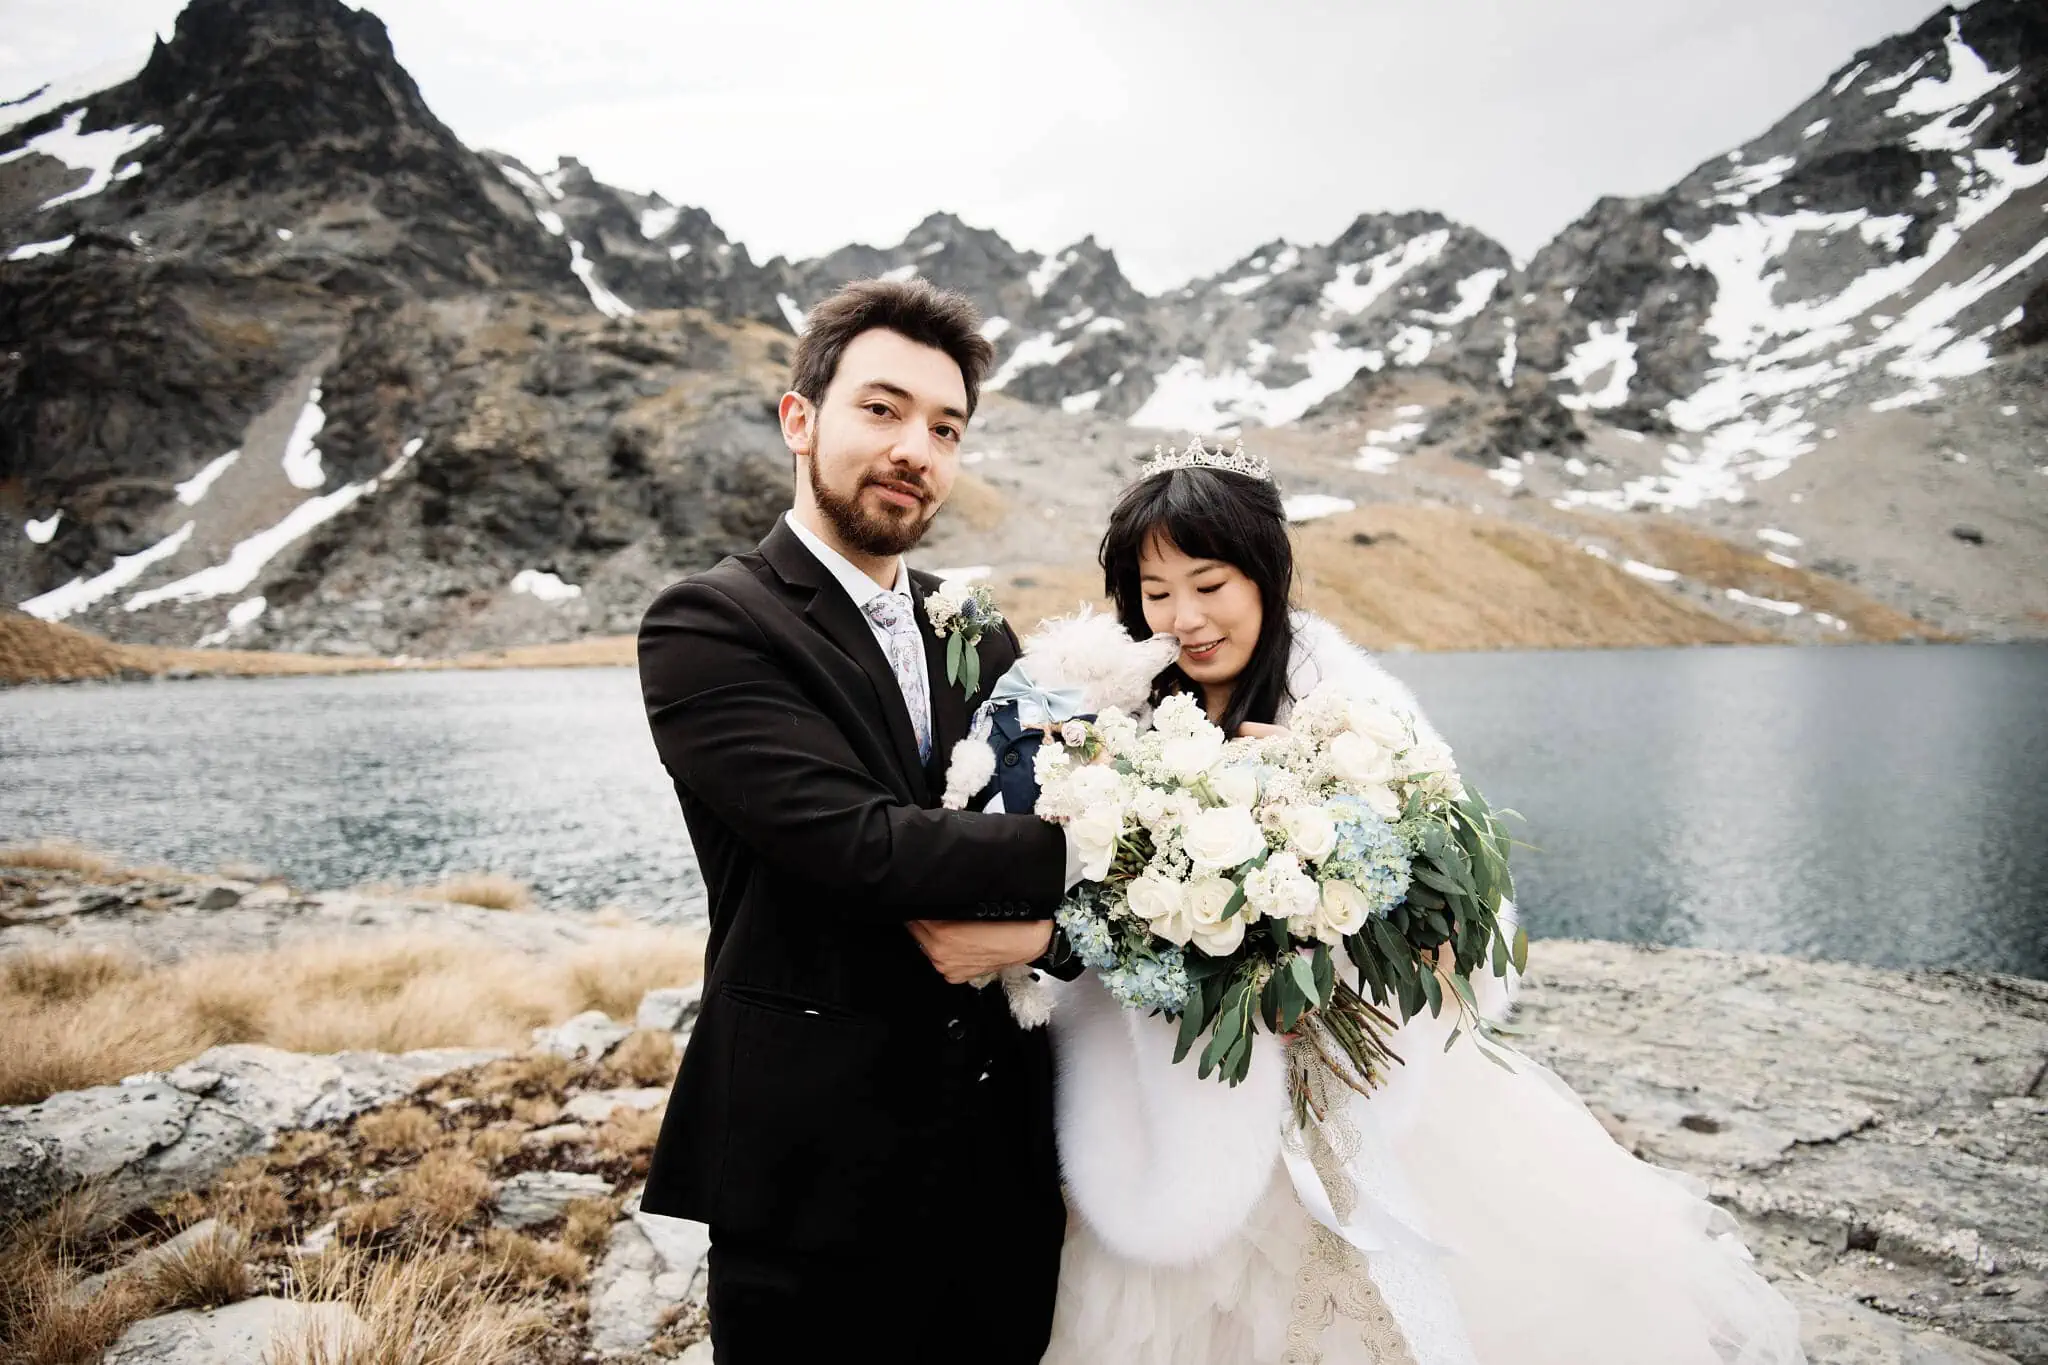 Carlos and Wanzhu's intimate elopement wedding in front of a lake.